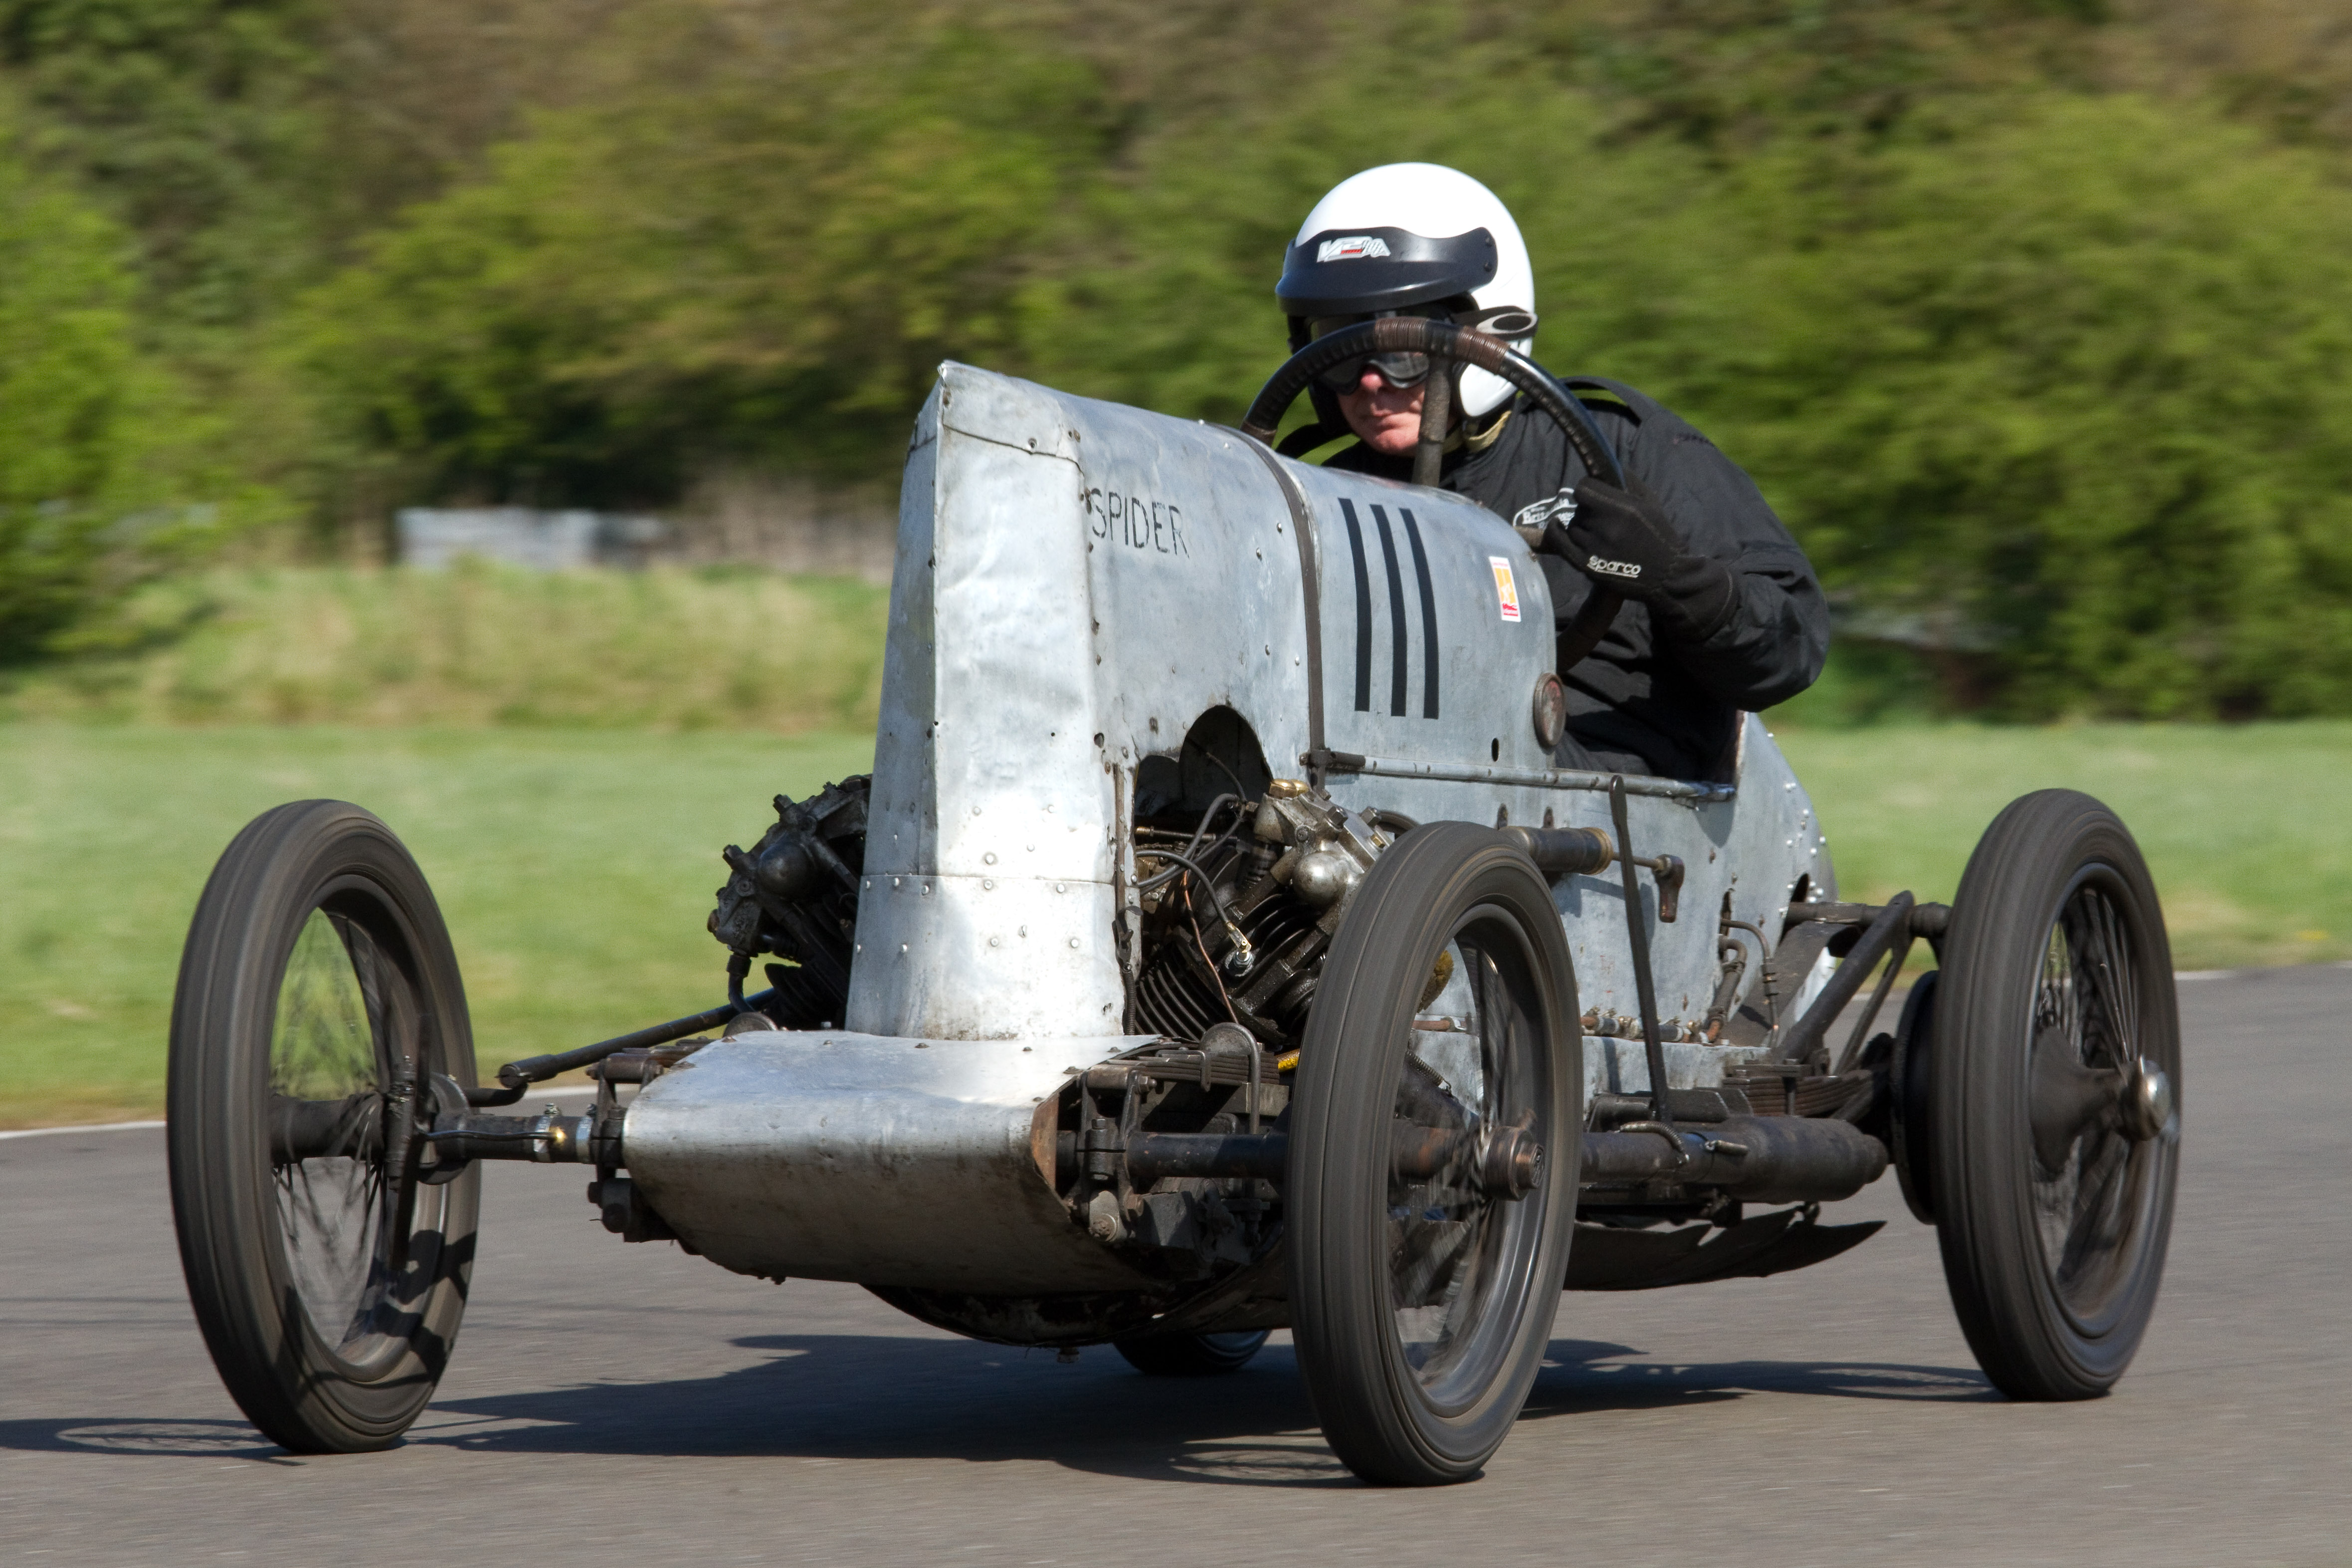 VSCC to celebrate yet another milestone in 2014 at Curborough this Bank Holiday Weekend cover